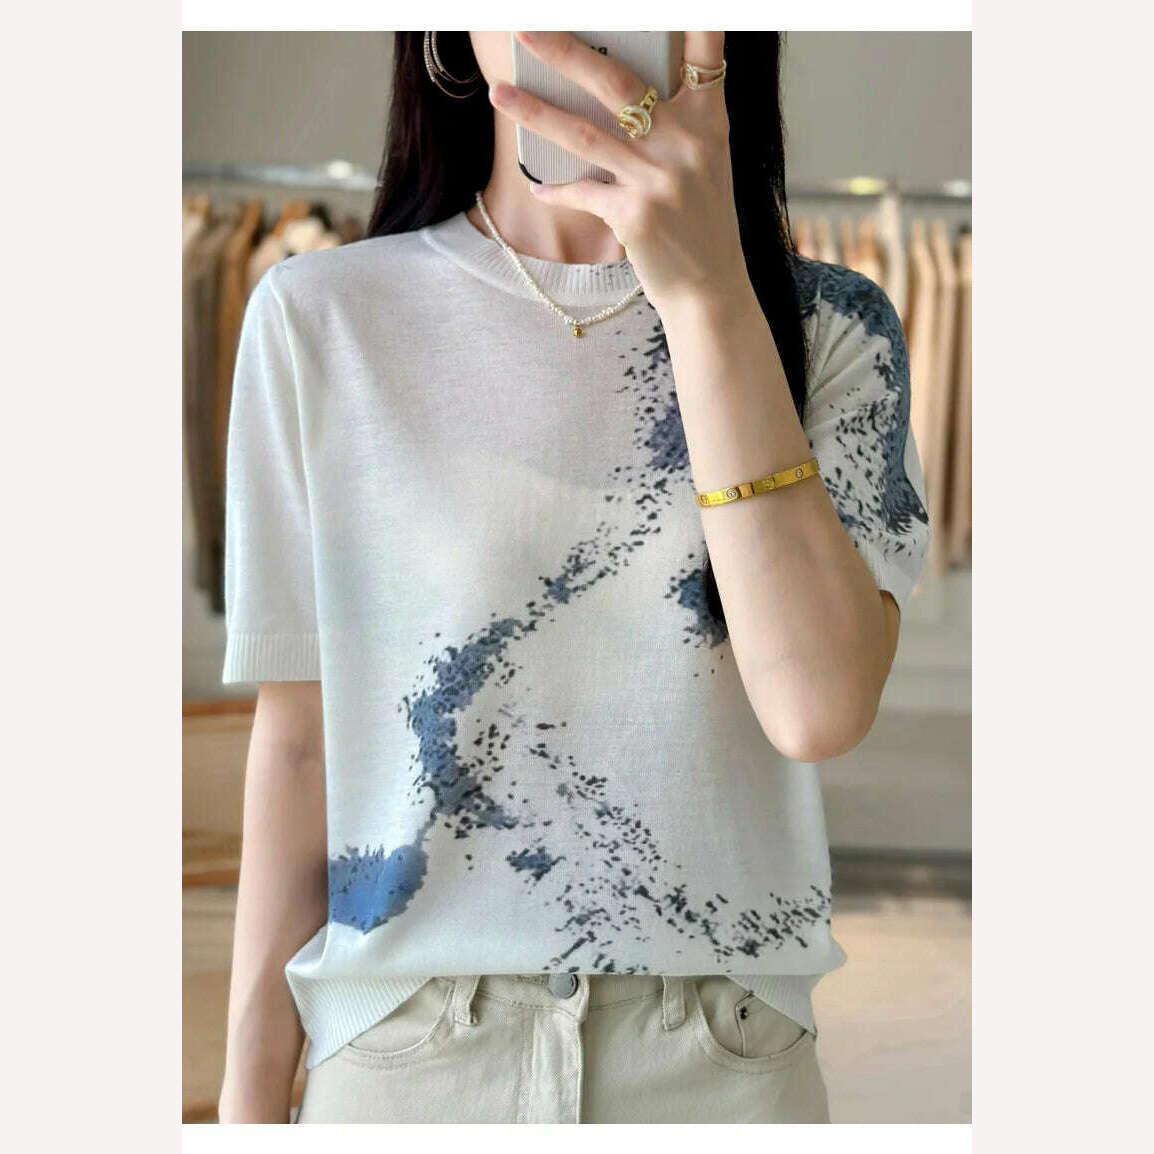 KIMLUD, Summer Thin Worsted Wool Short Sleeve Printed Graffiti Sweater Women's Low Round Neck Pullover Loose Slim Half Sleeve T-shirt, KIMLUD Womens Clothes